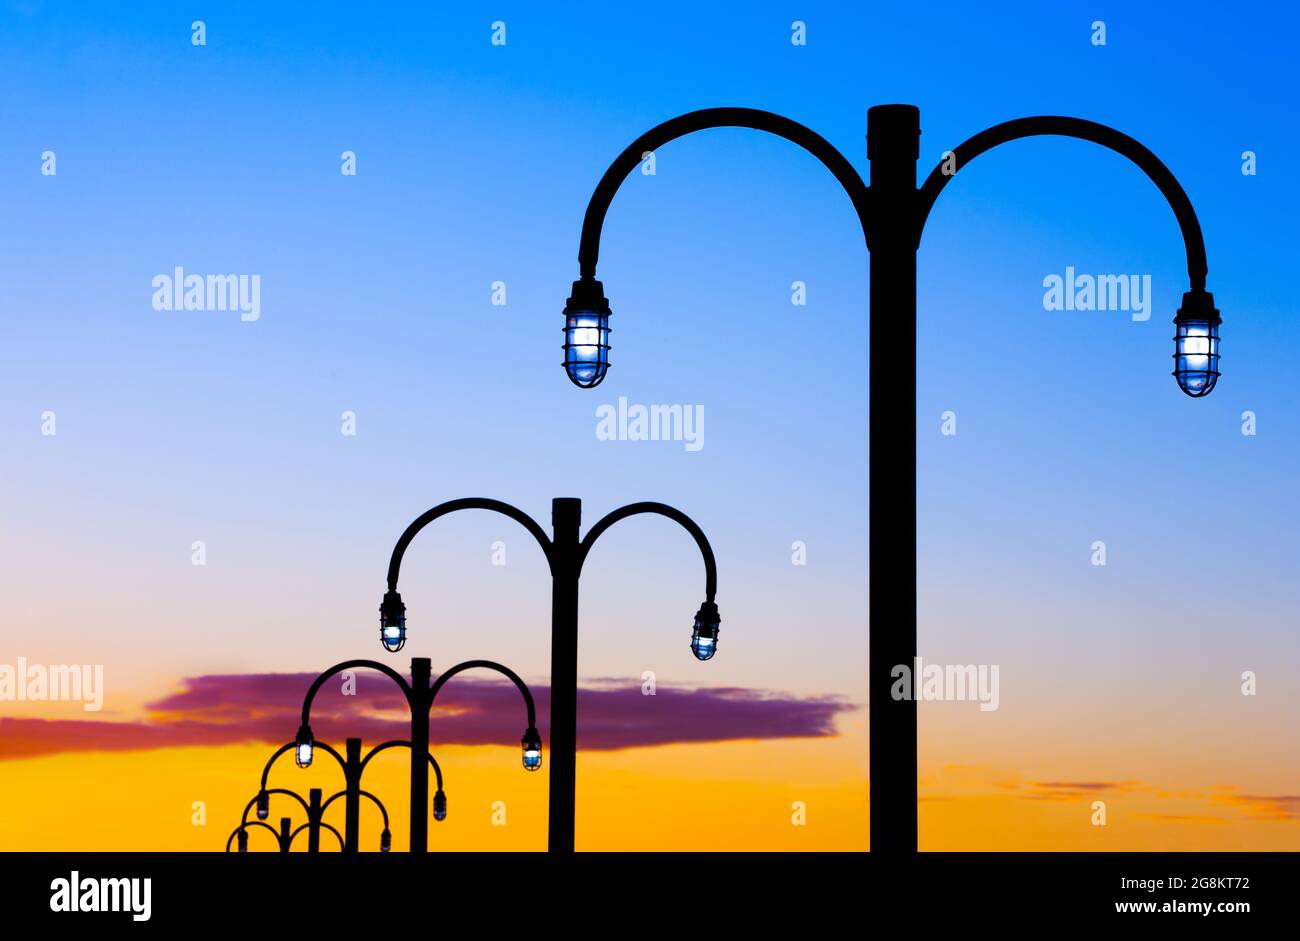 Ornate street lamps during twilight. Stock Photo